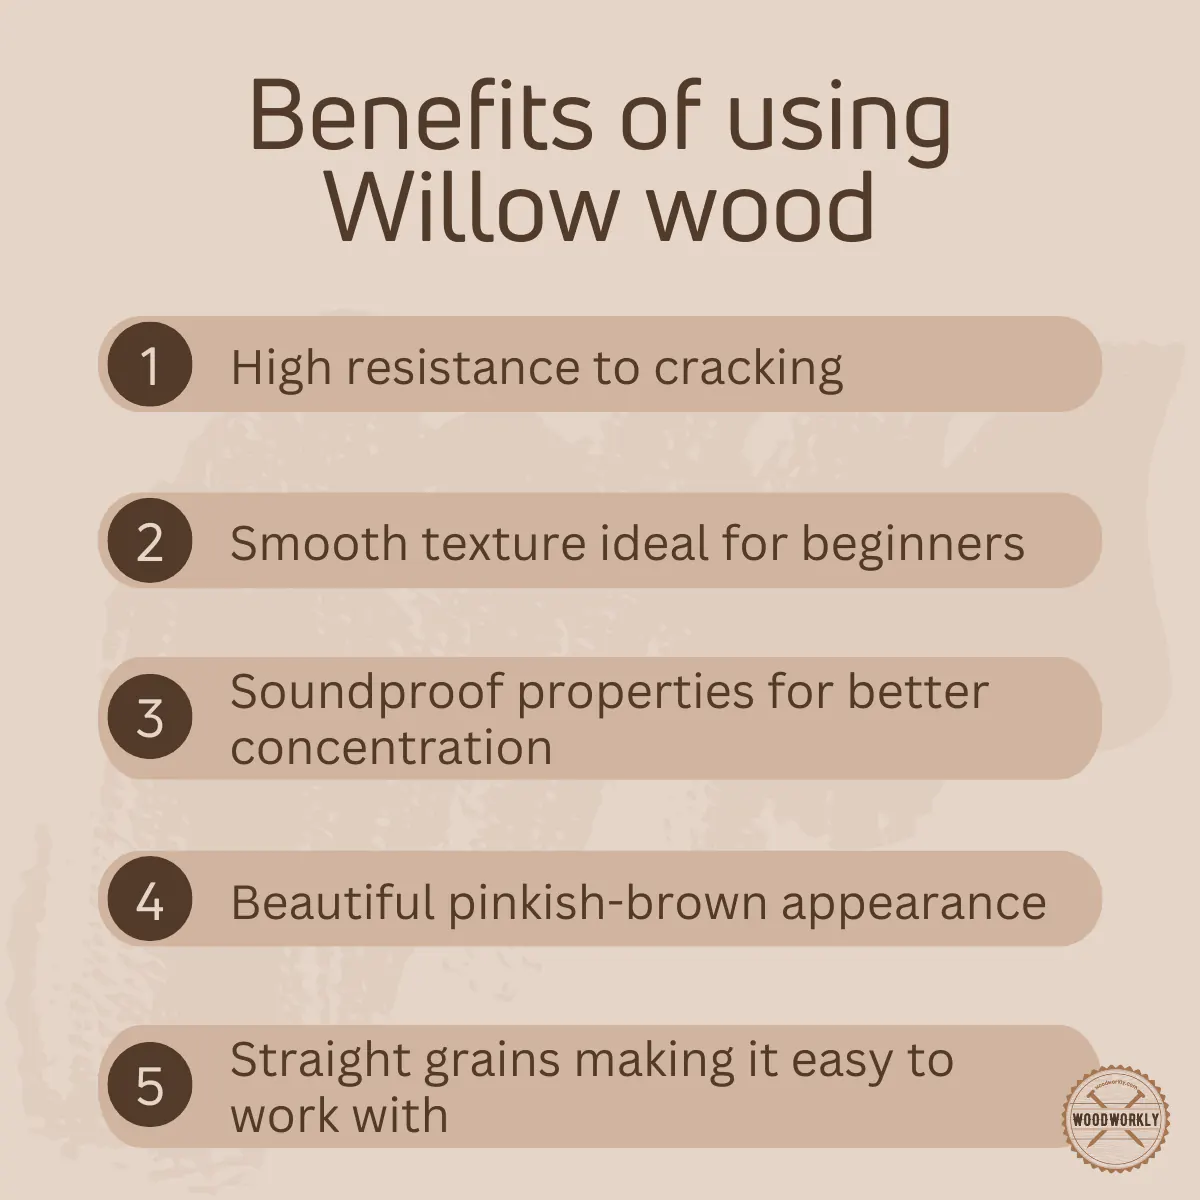 Benefits of using Willow wood as an axe throwing target